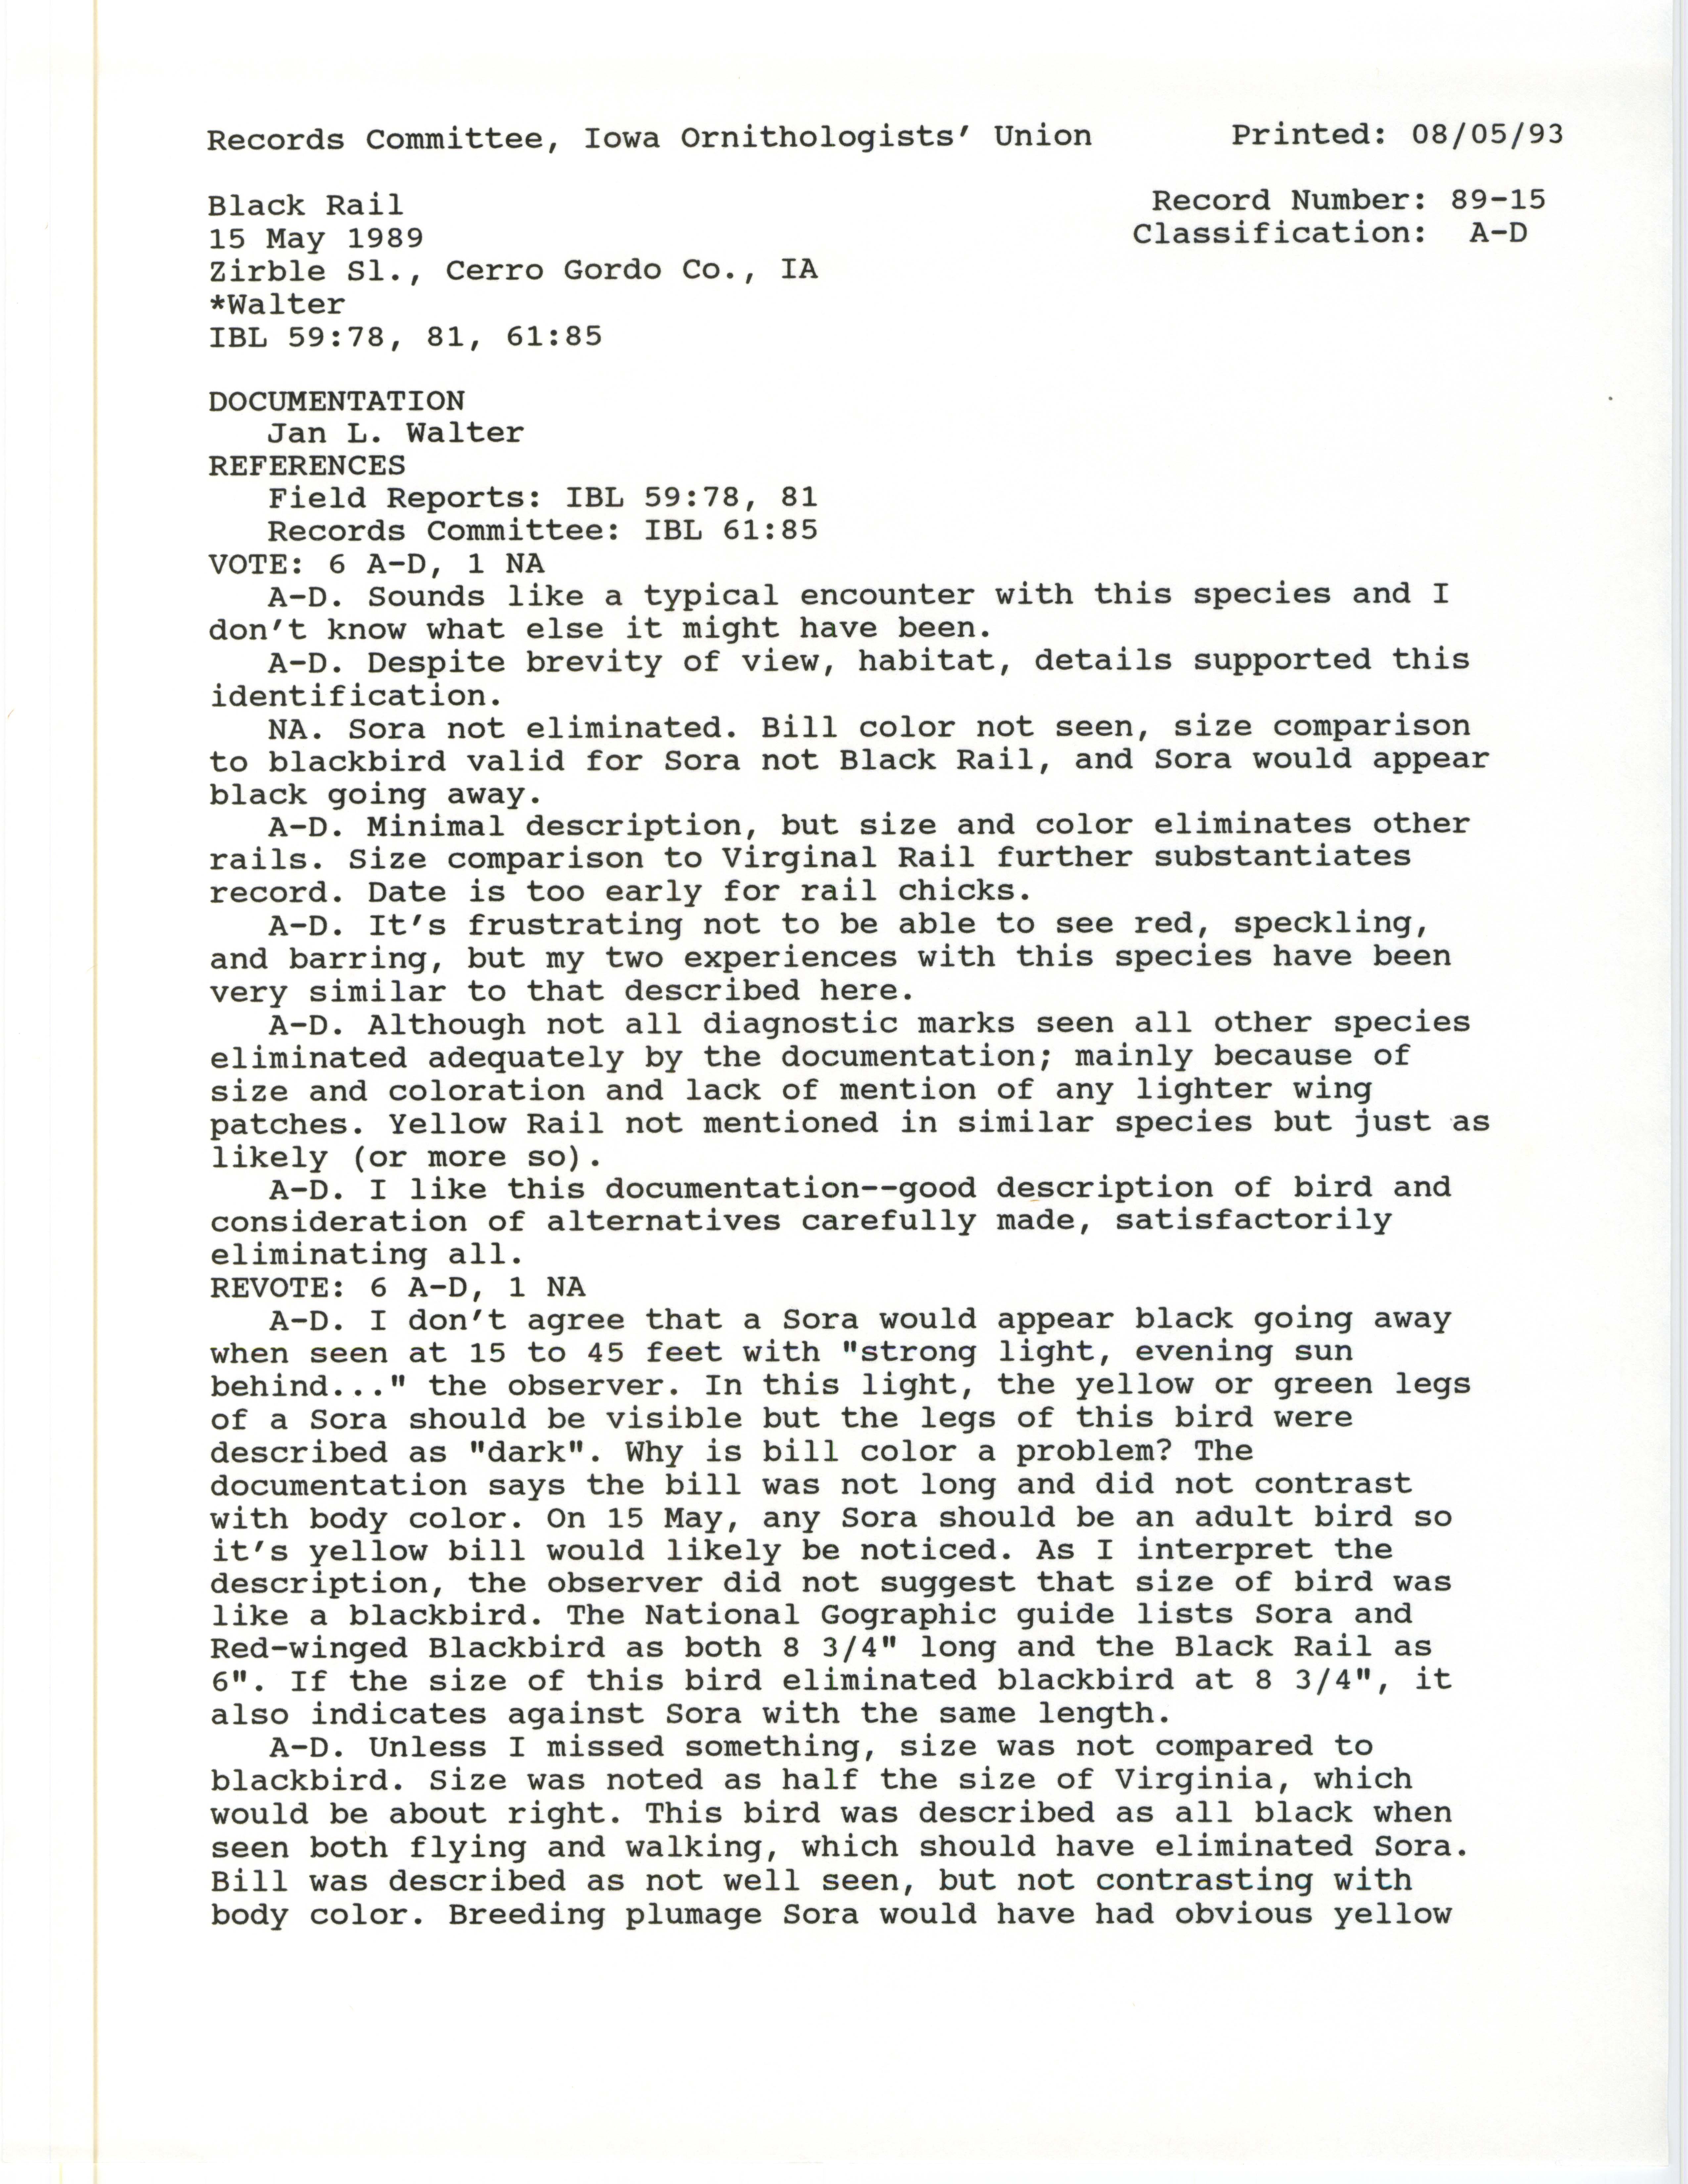 Records Committee review for rare bird sighting of Black Rail at Zirbel Slough, 1989